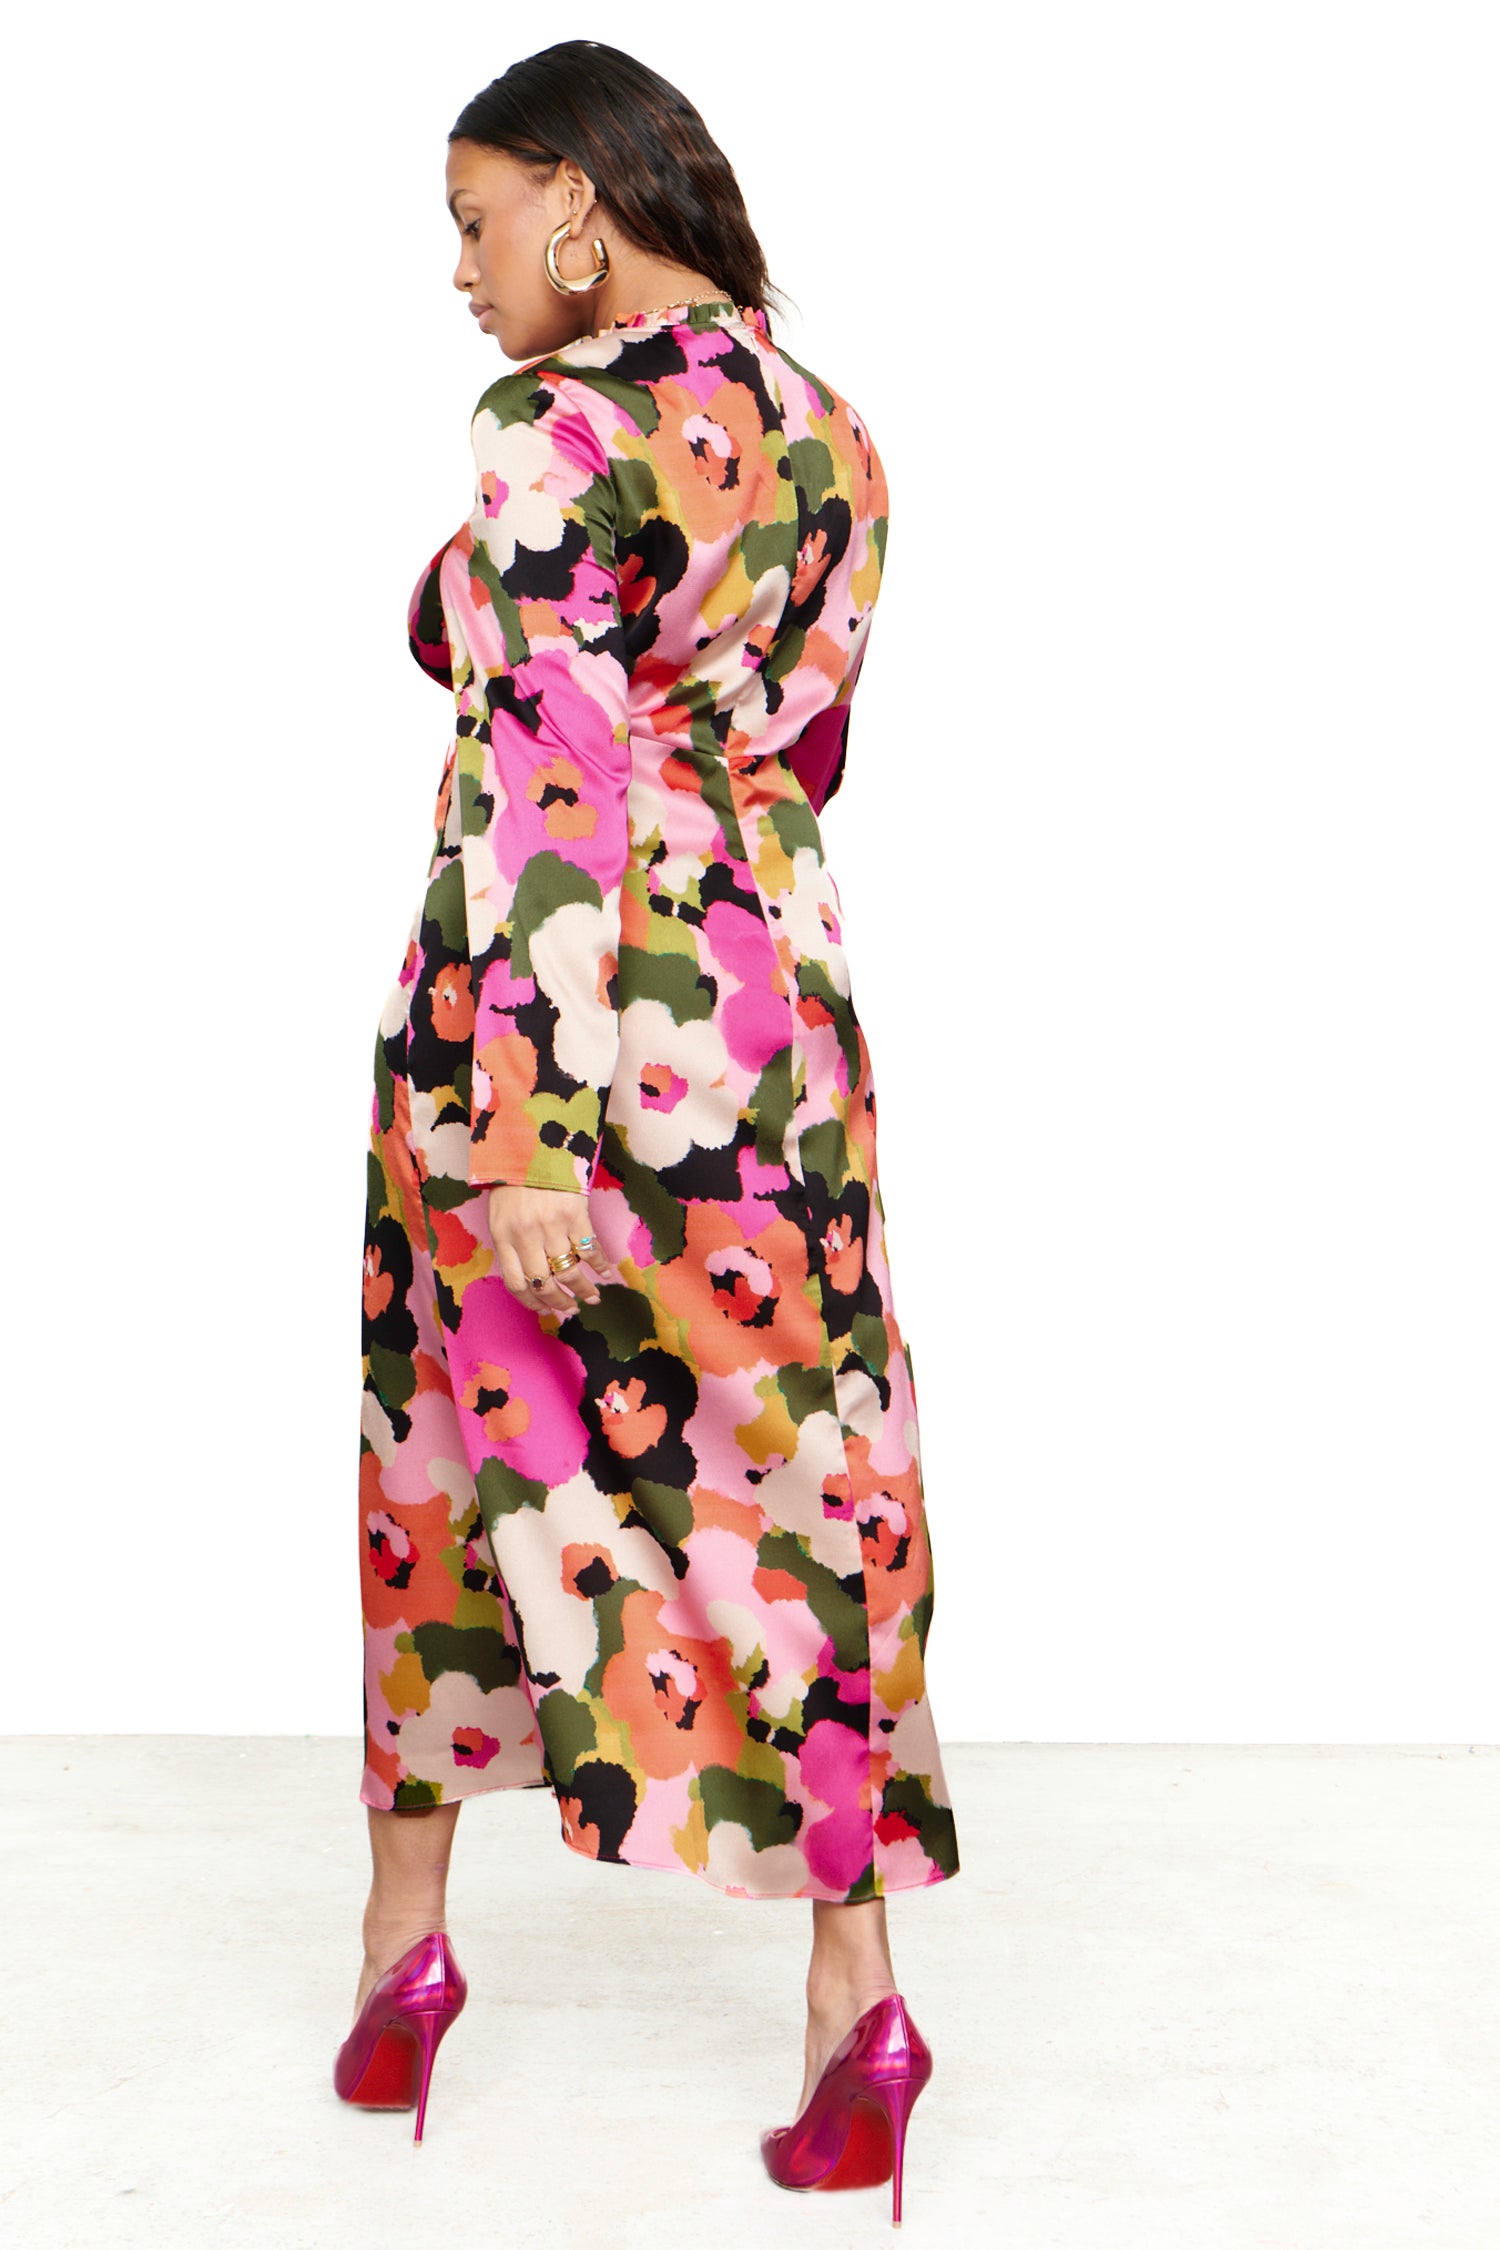 Model wearing Winter Blossom Beau Dress standing facing away from the camera